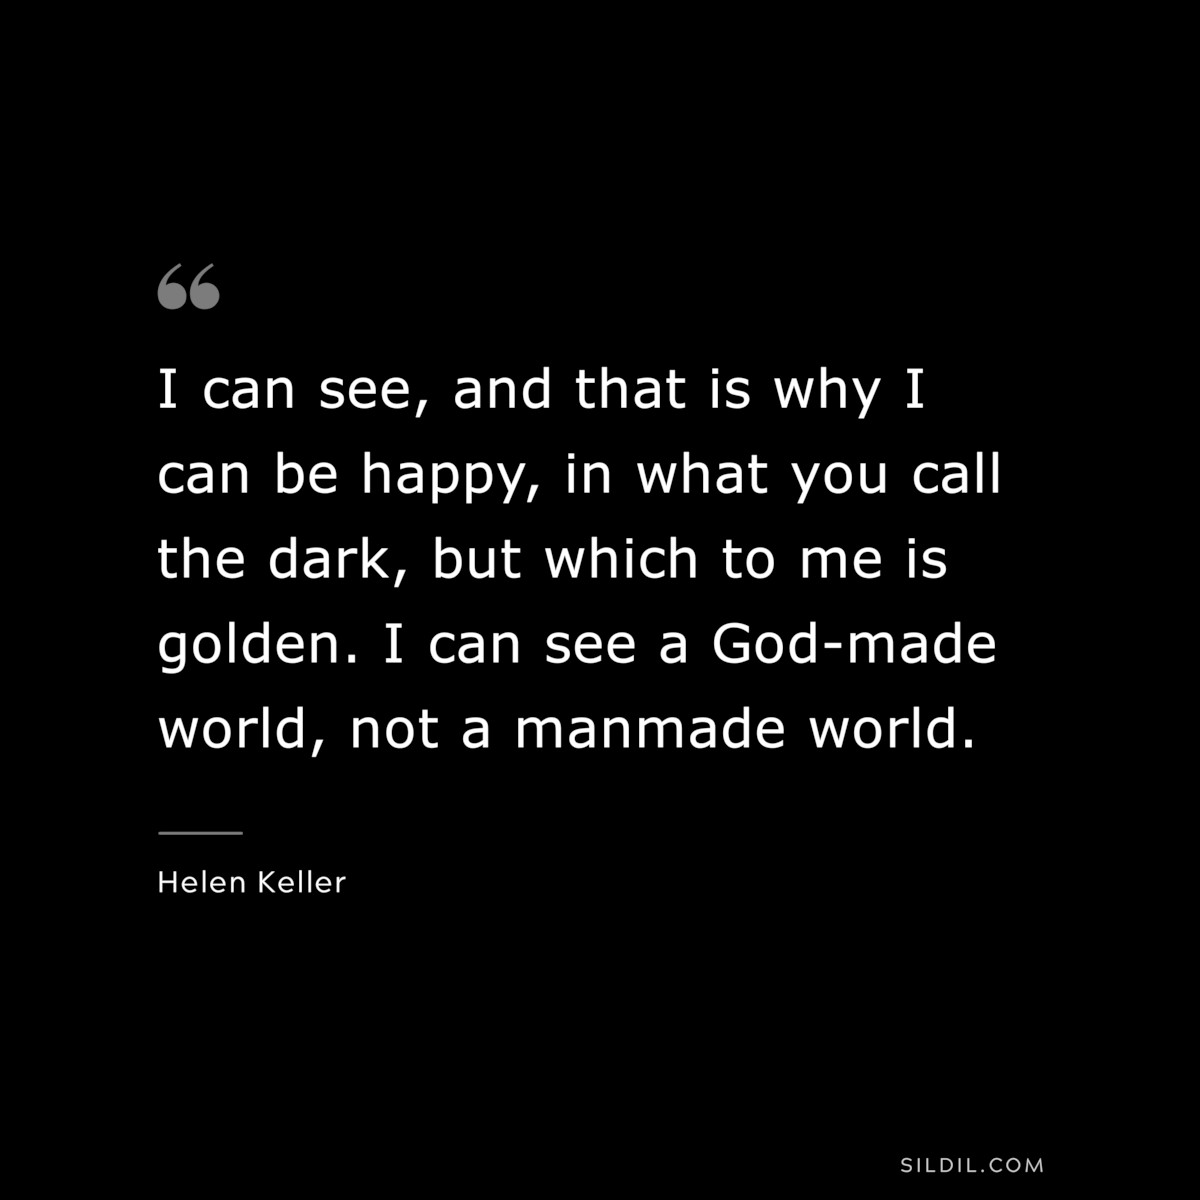 I can see, and that is why I can be happy, in what you call the dark, but which to me is golden. I can see a God-made world, not a manmade world. ― Helen Keller